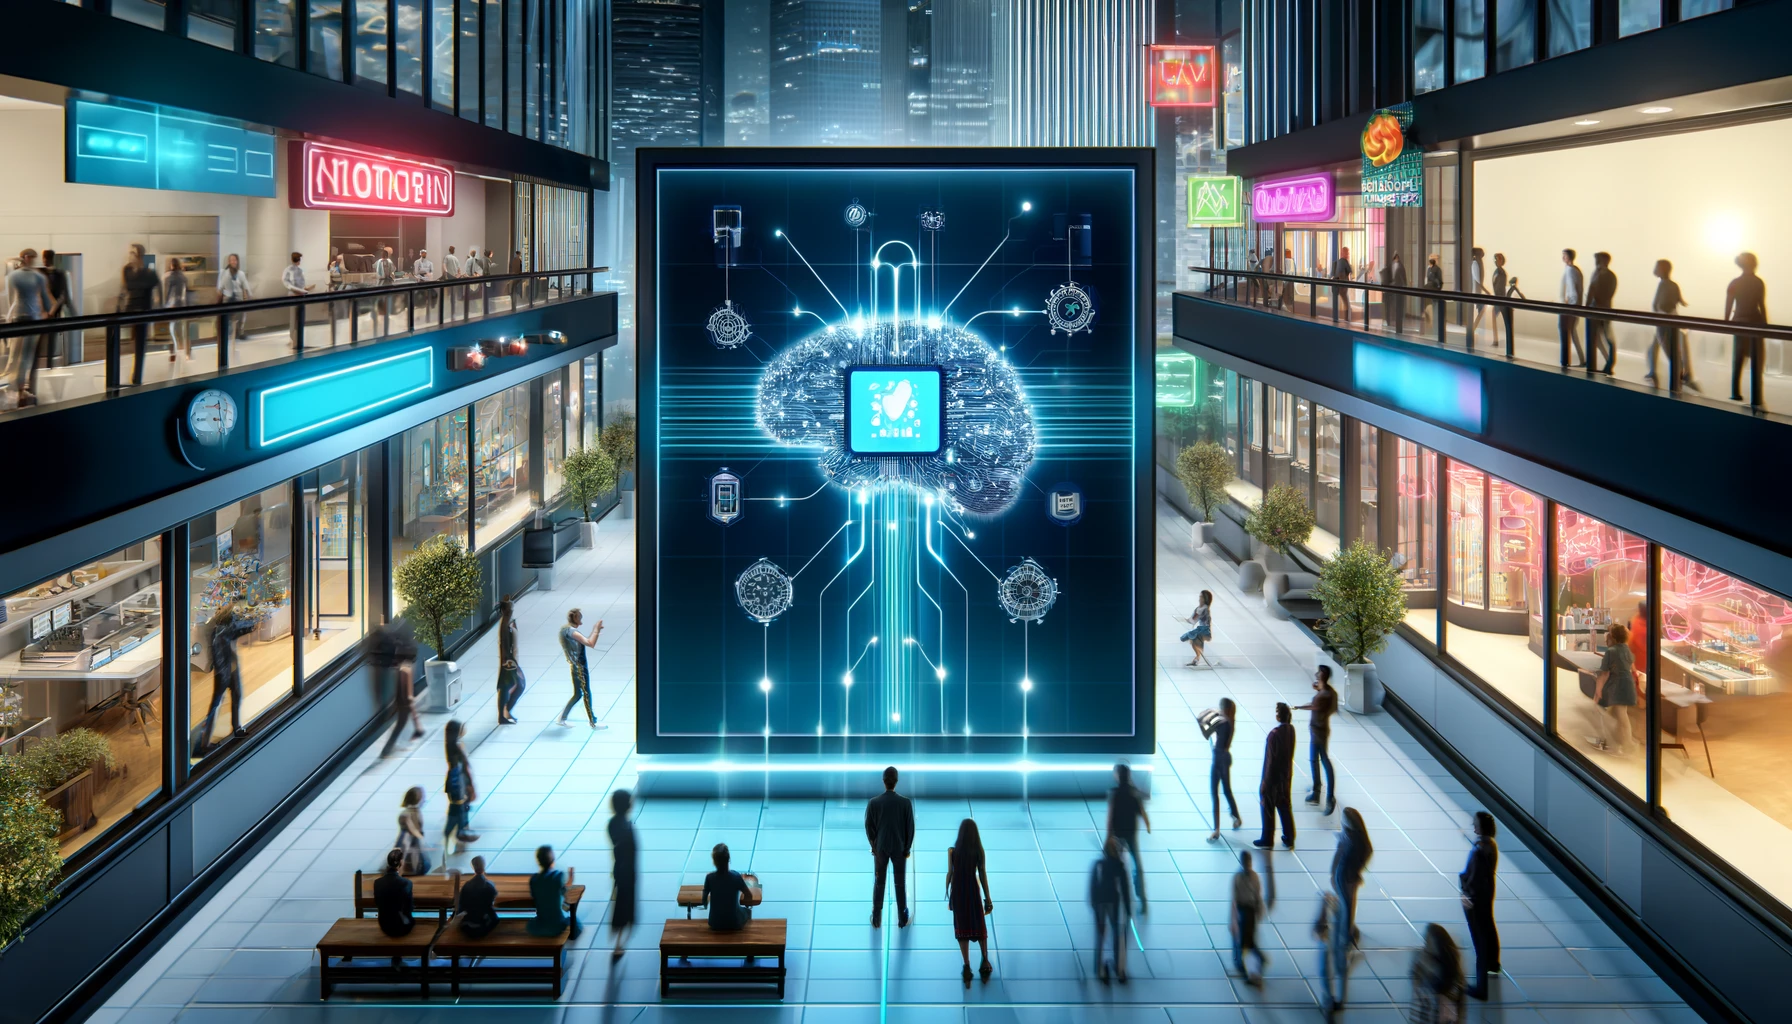 A futuristic scene of a digital billboard in a sleek commercial environment, with people interacting and glowing lines representing targeted ad reach and an AI core processing data.